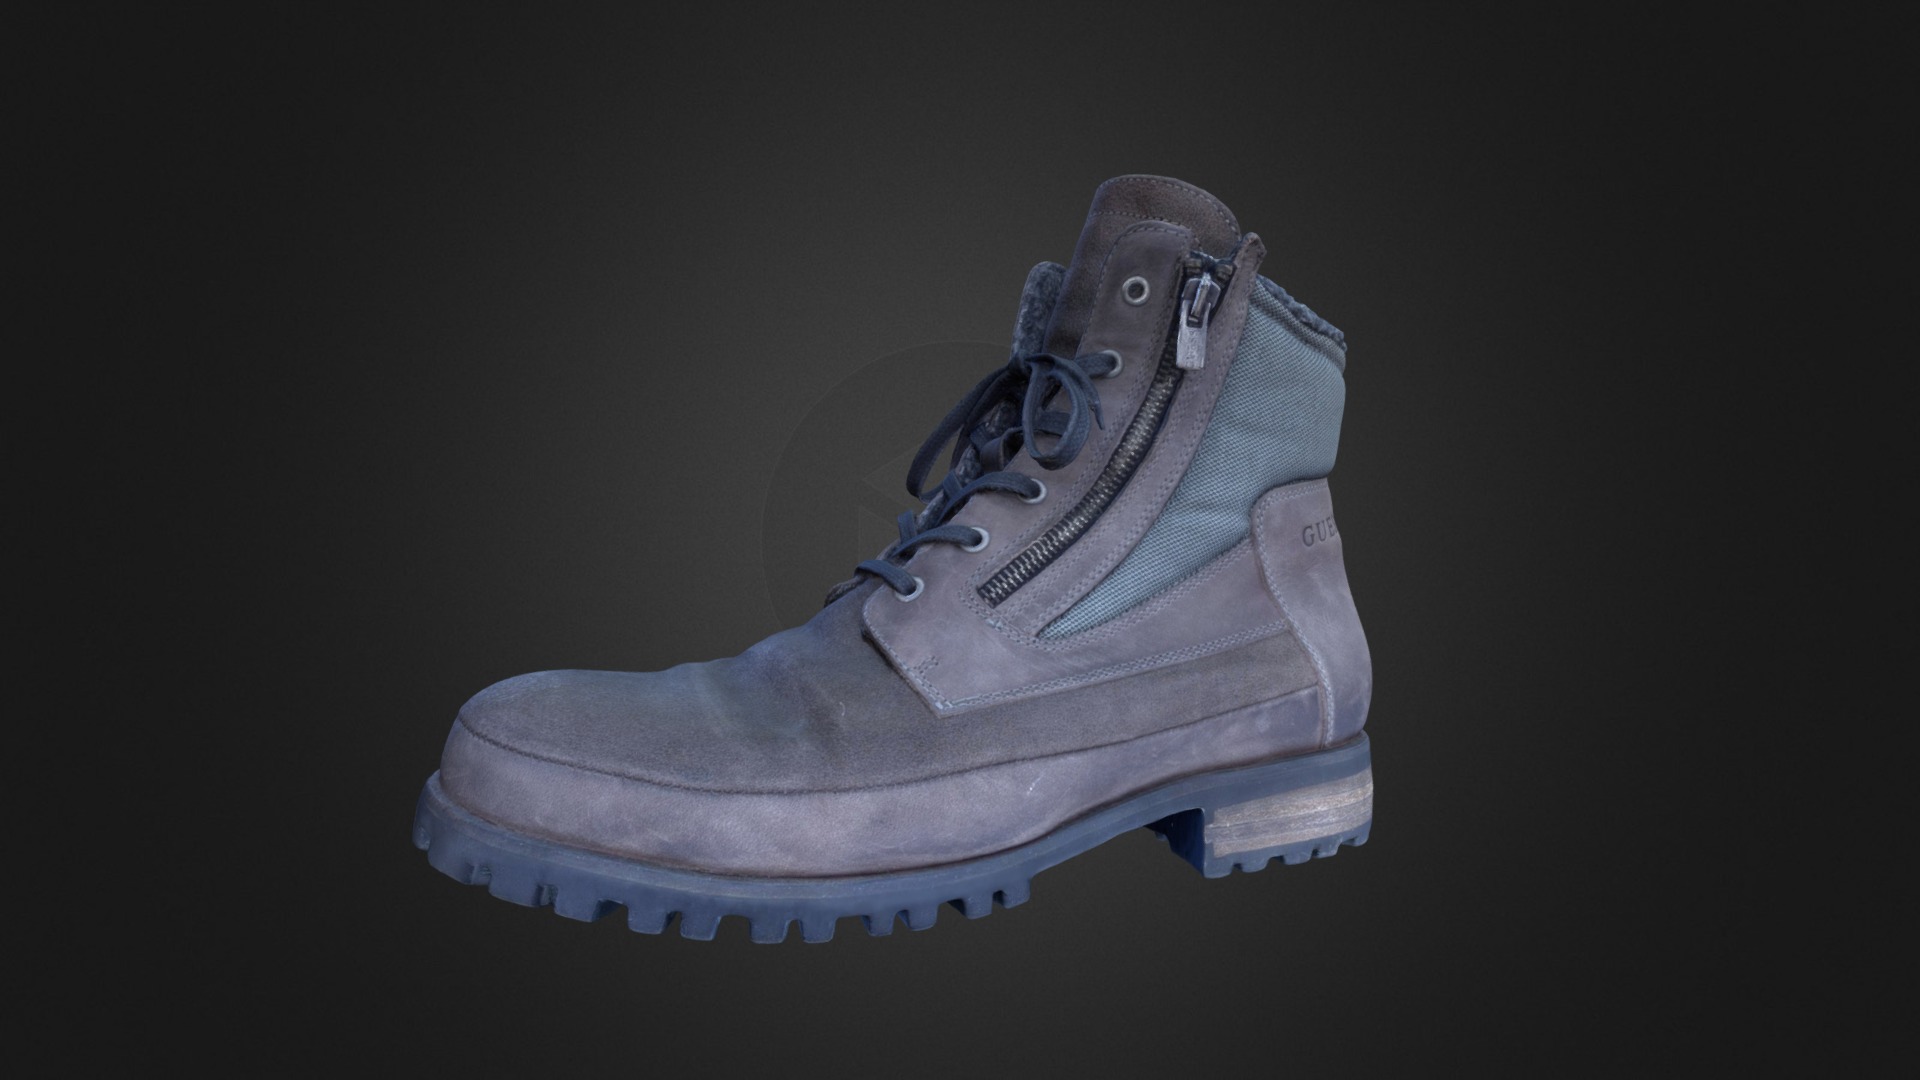 3D model Shoe - This is a 3D model of the Shoe. The 3D model is about a grey shoe with a white sole.